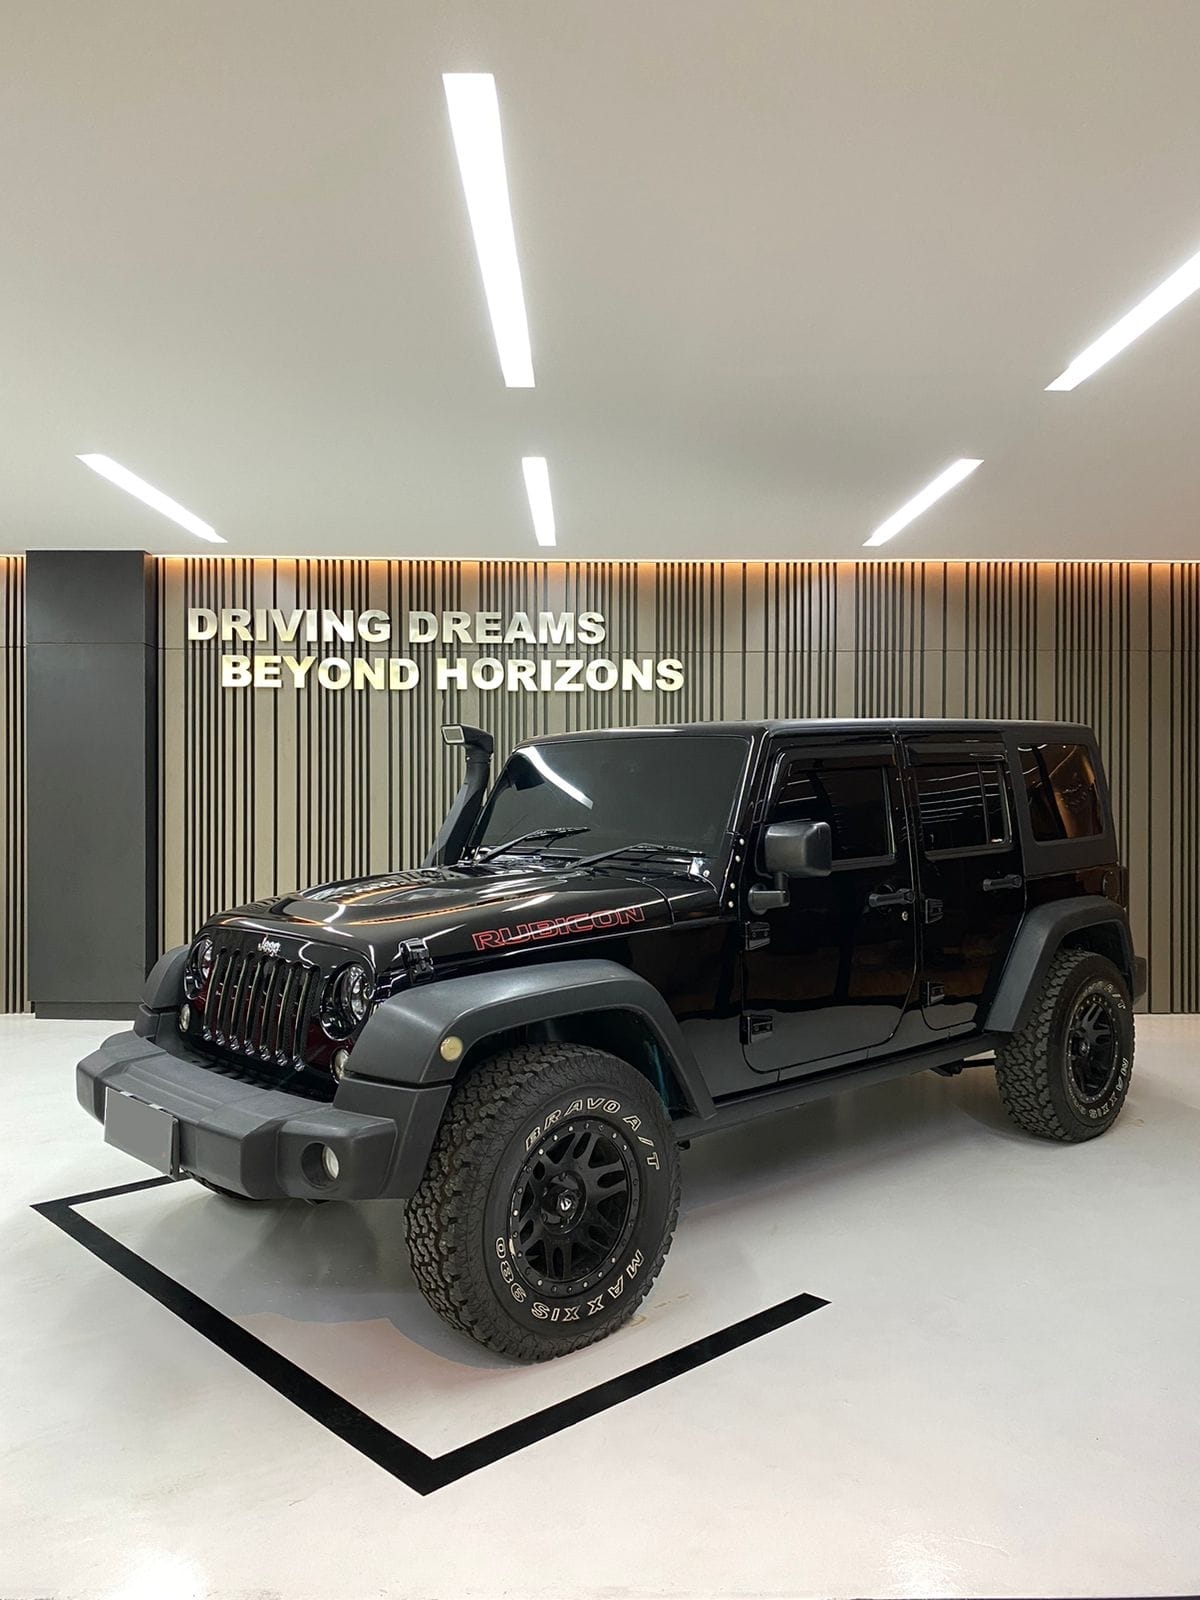 Used 2014 Jeep Wrangler Rubicon 3.6L AT 4 D 3.6L AT 4 D